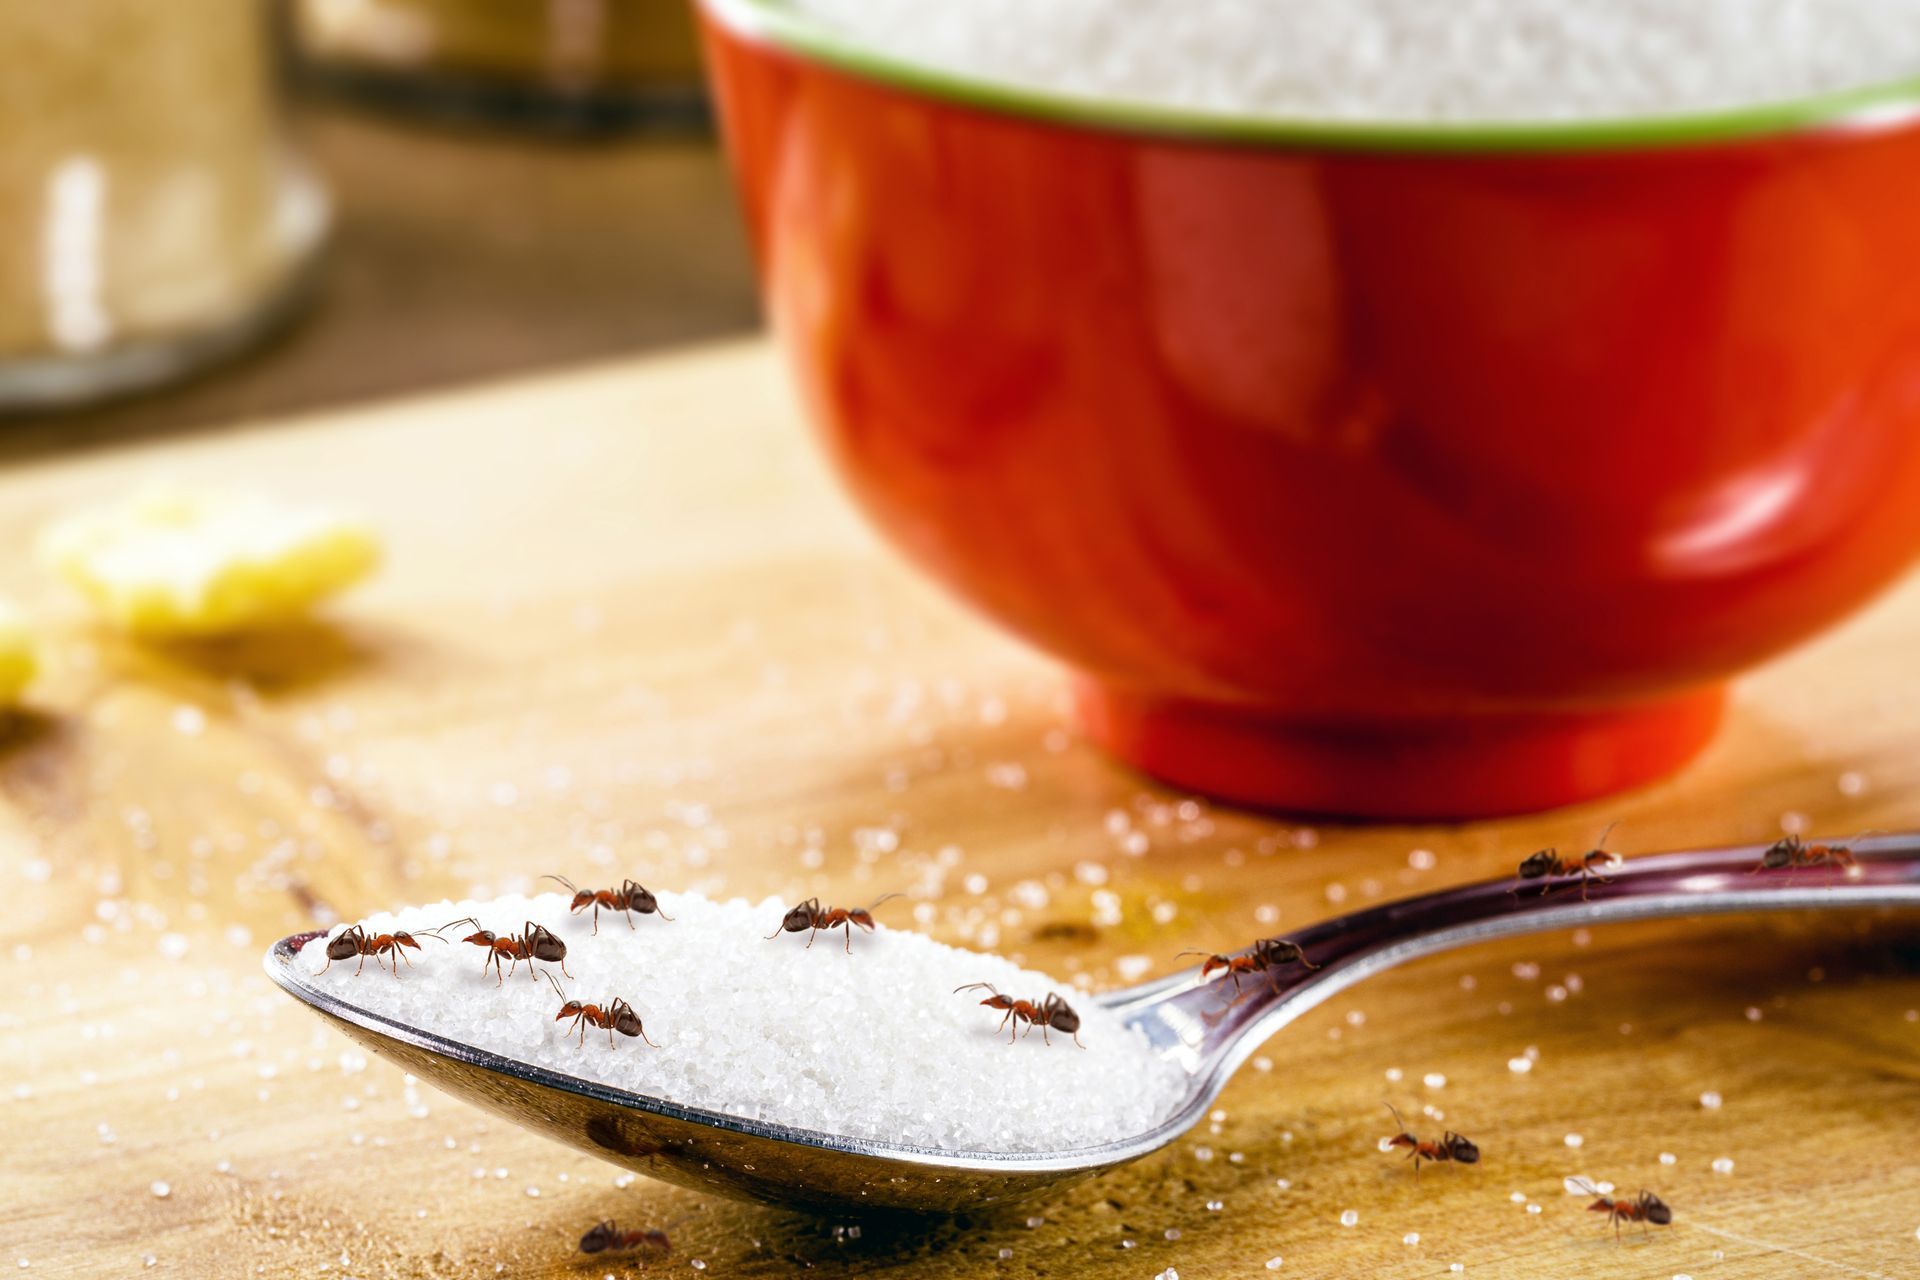 Ants are crawling on a spoon of sugar next to a bowl of sugar.